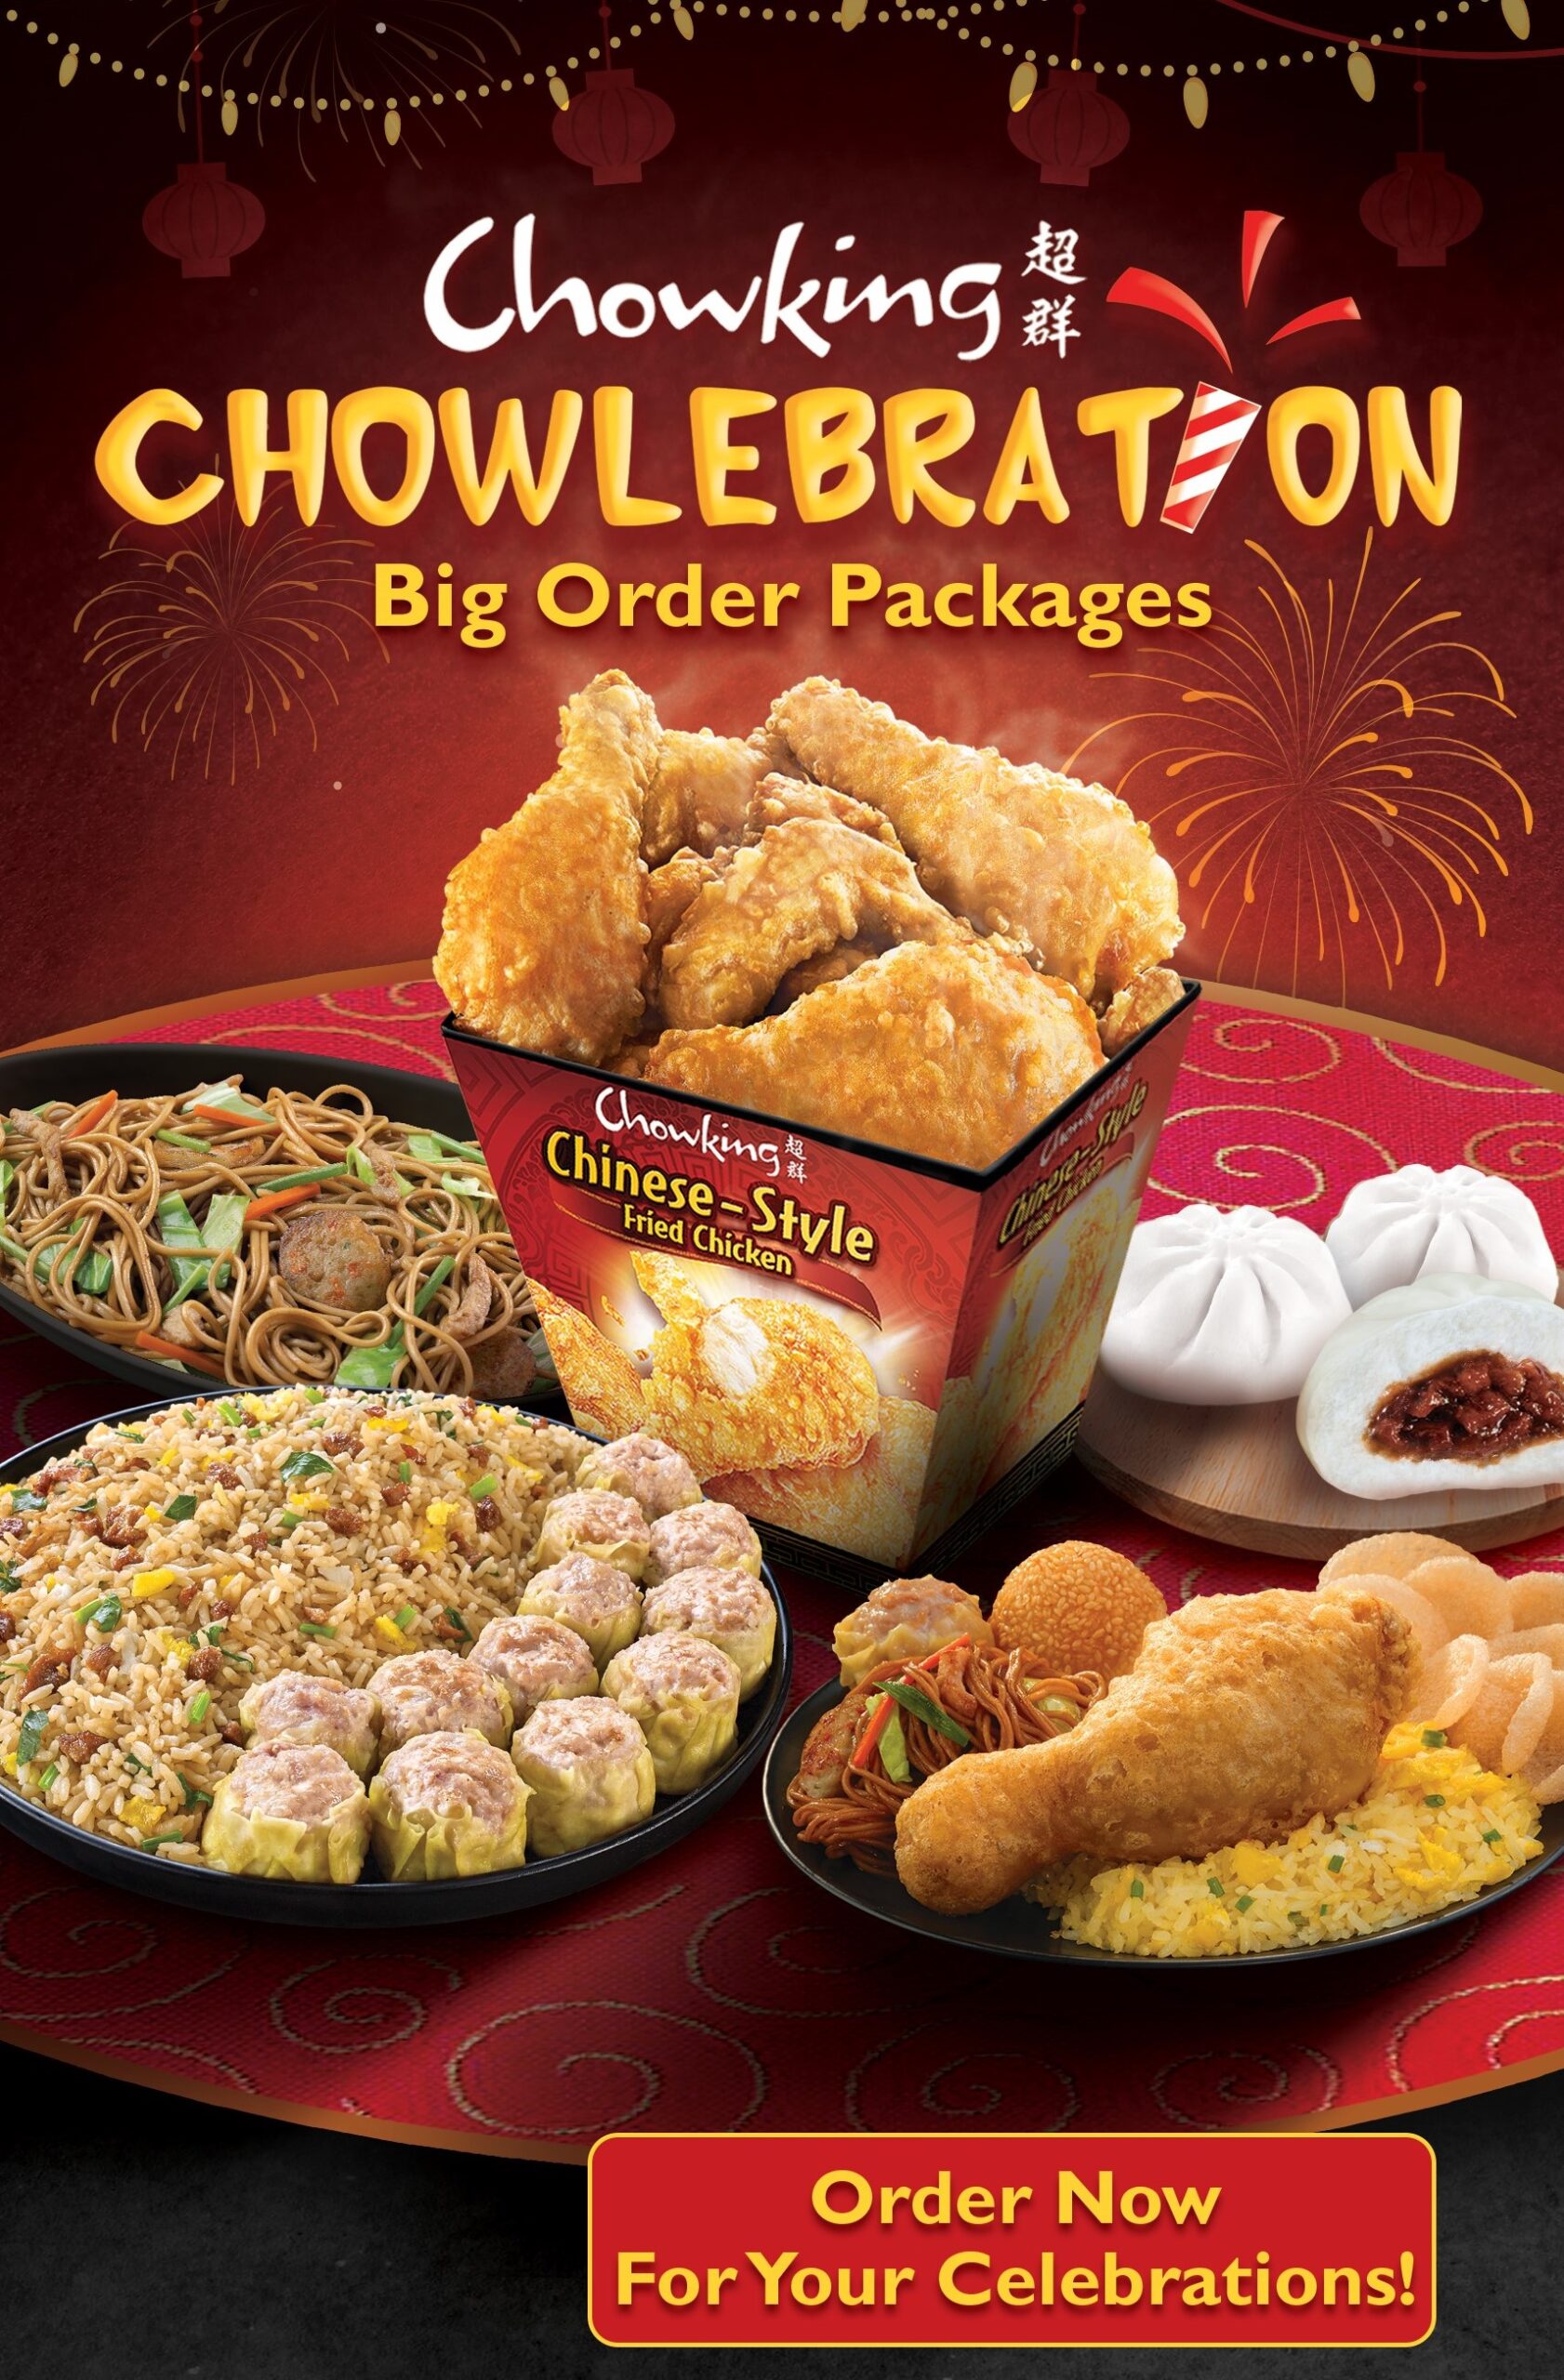 Planning a big party this holiday season? Celebrate with Chowking Chowlebration!